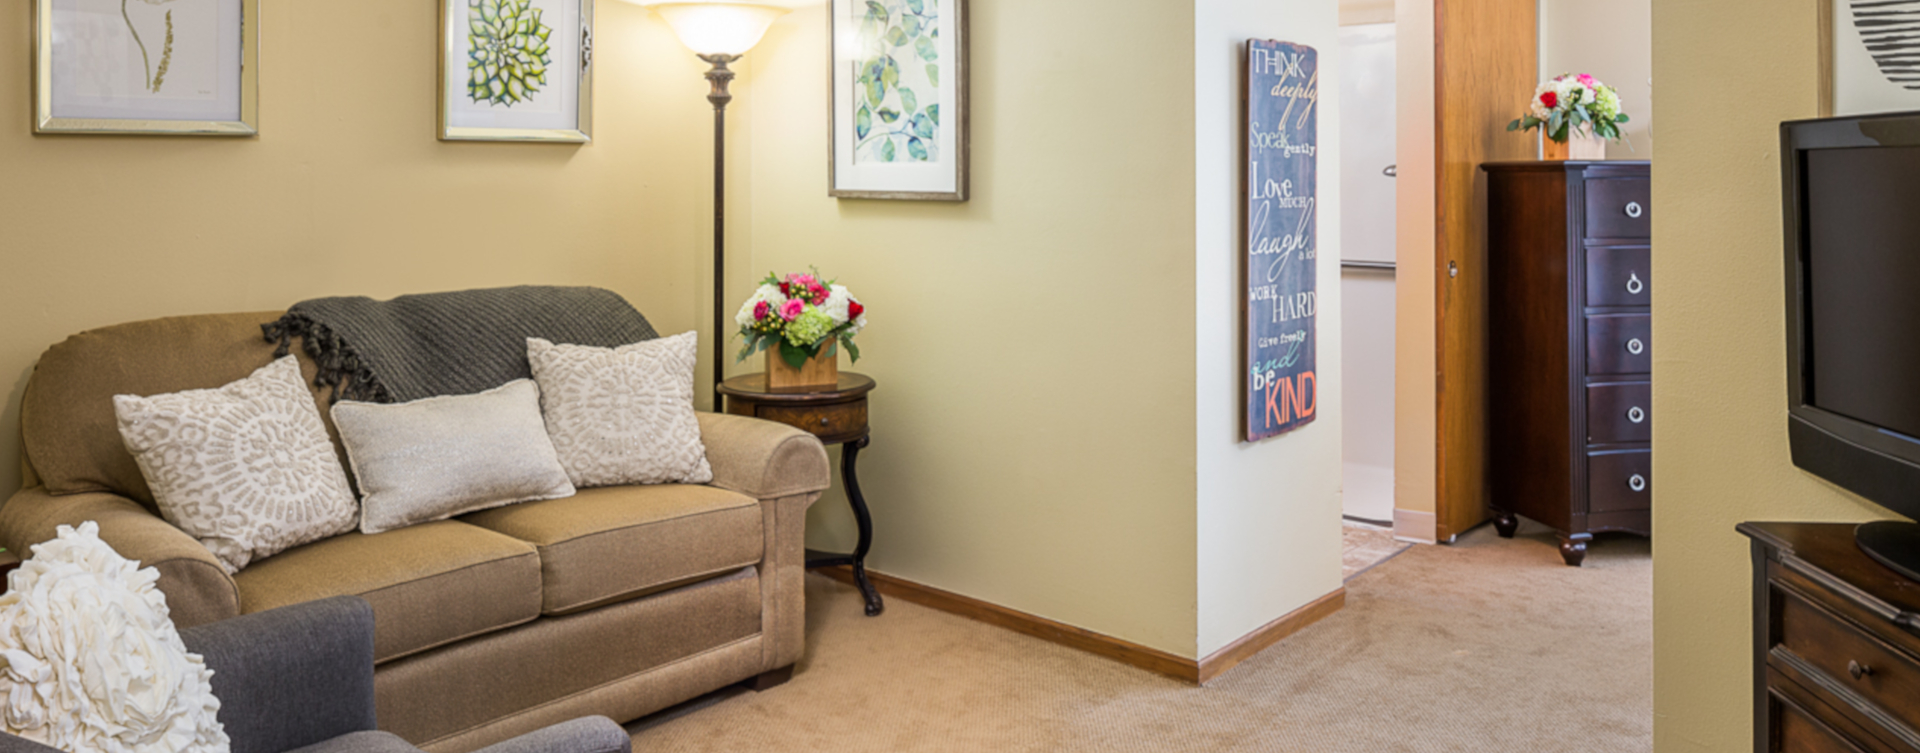 Personalize and decorate to your unique tastes an apartment at Bickford of Urbandale